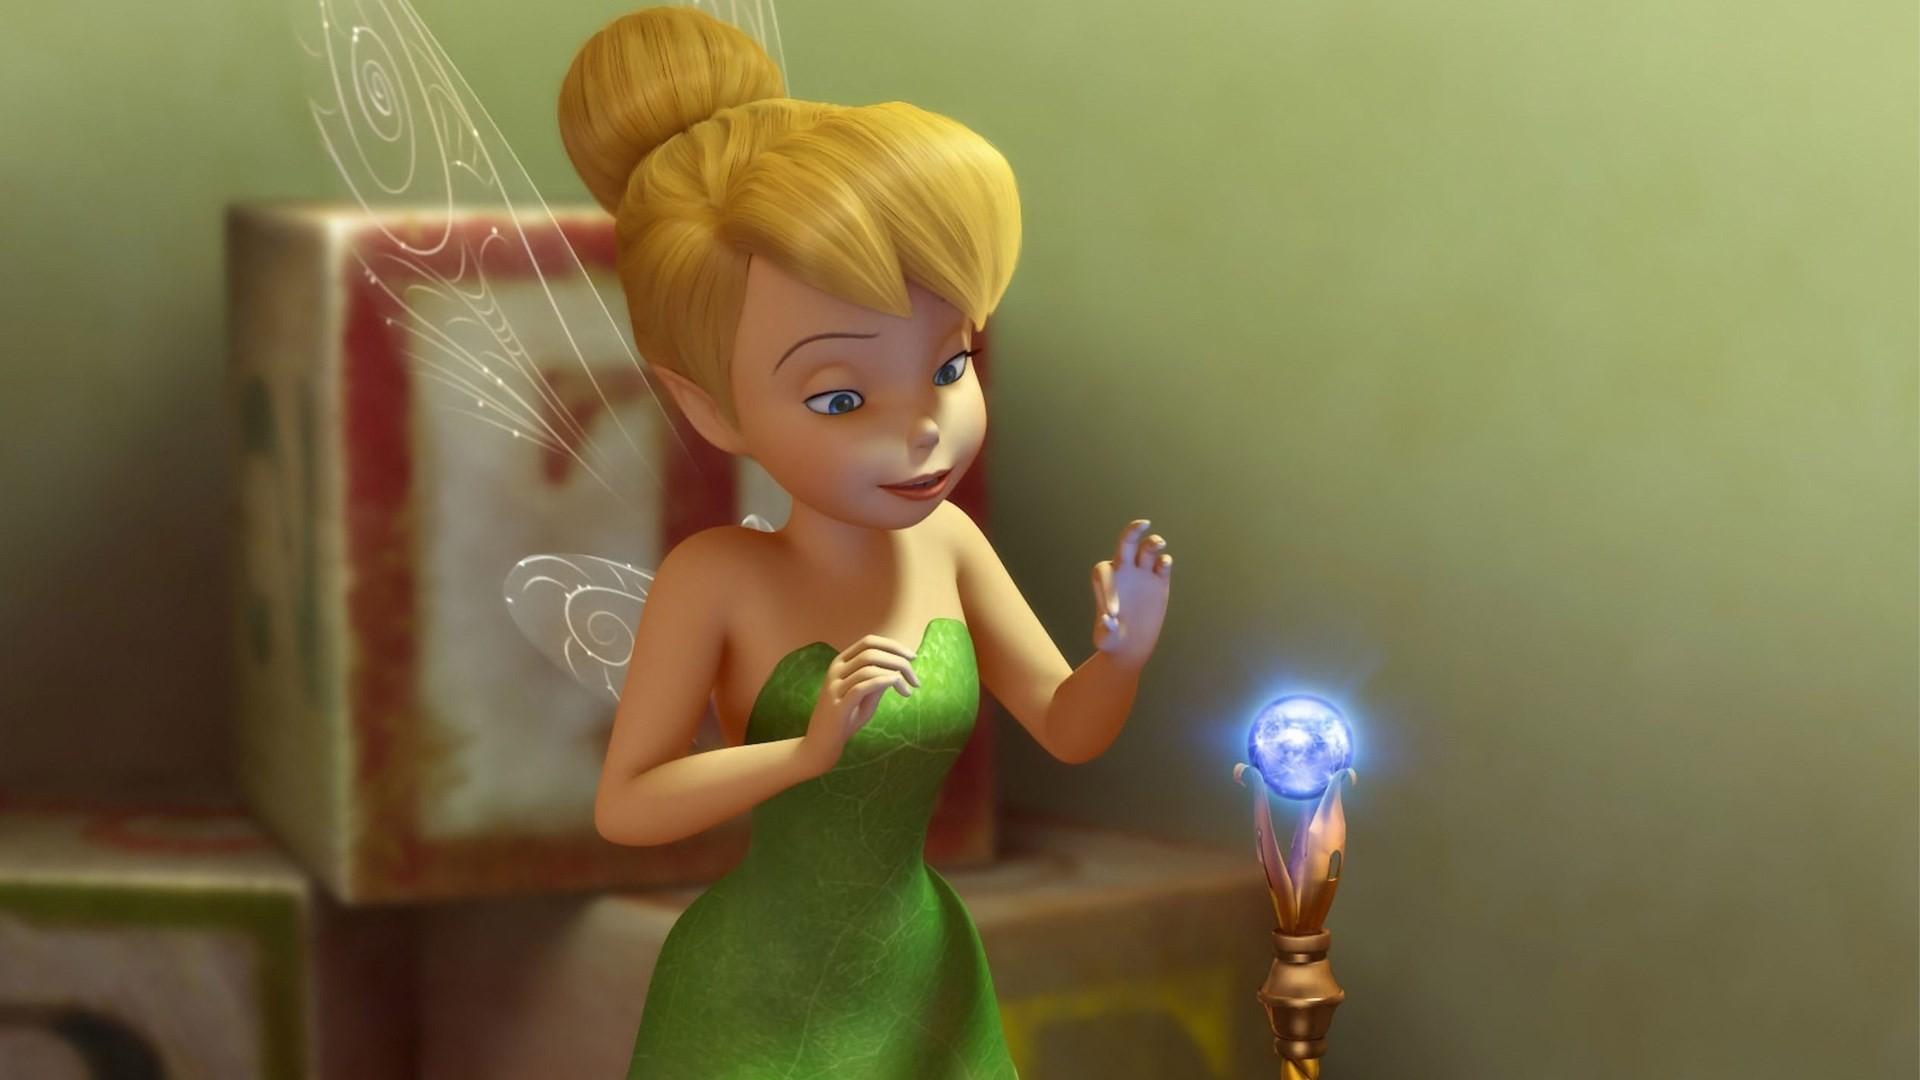 1920x1080 tinker bell and the lost treasure backround desktop nexus wallpaper - tinker  bell and the lost